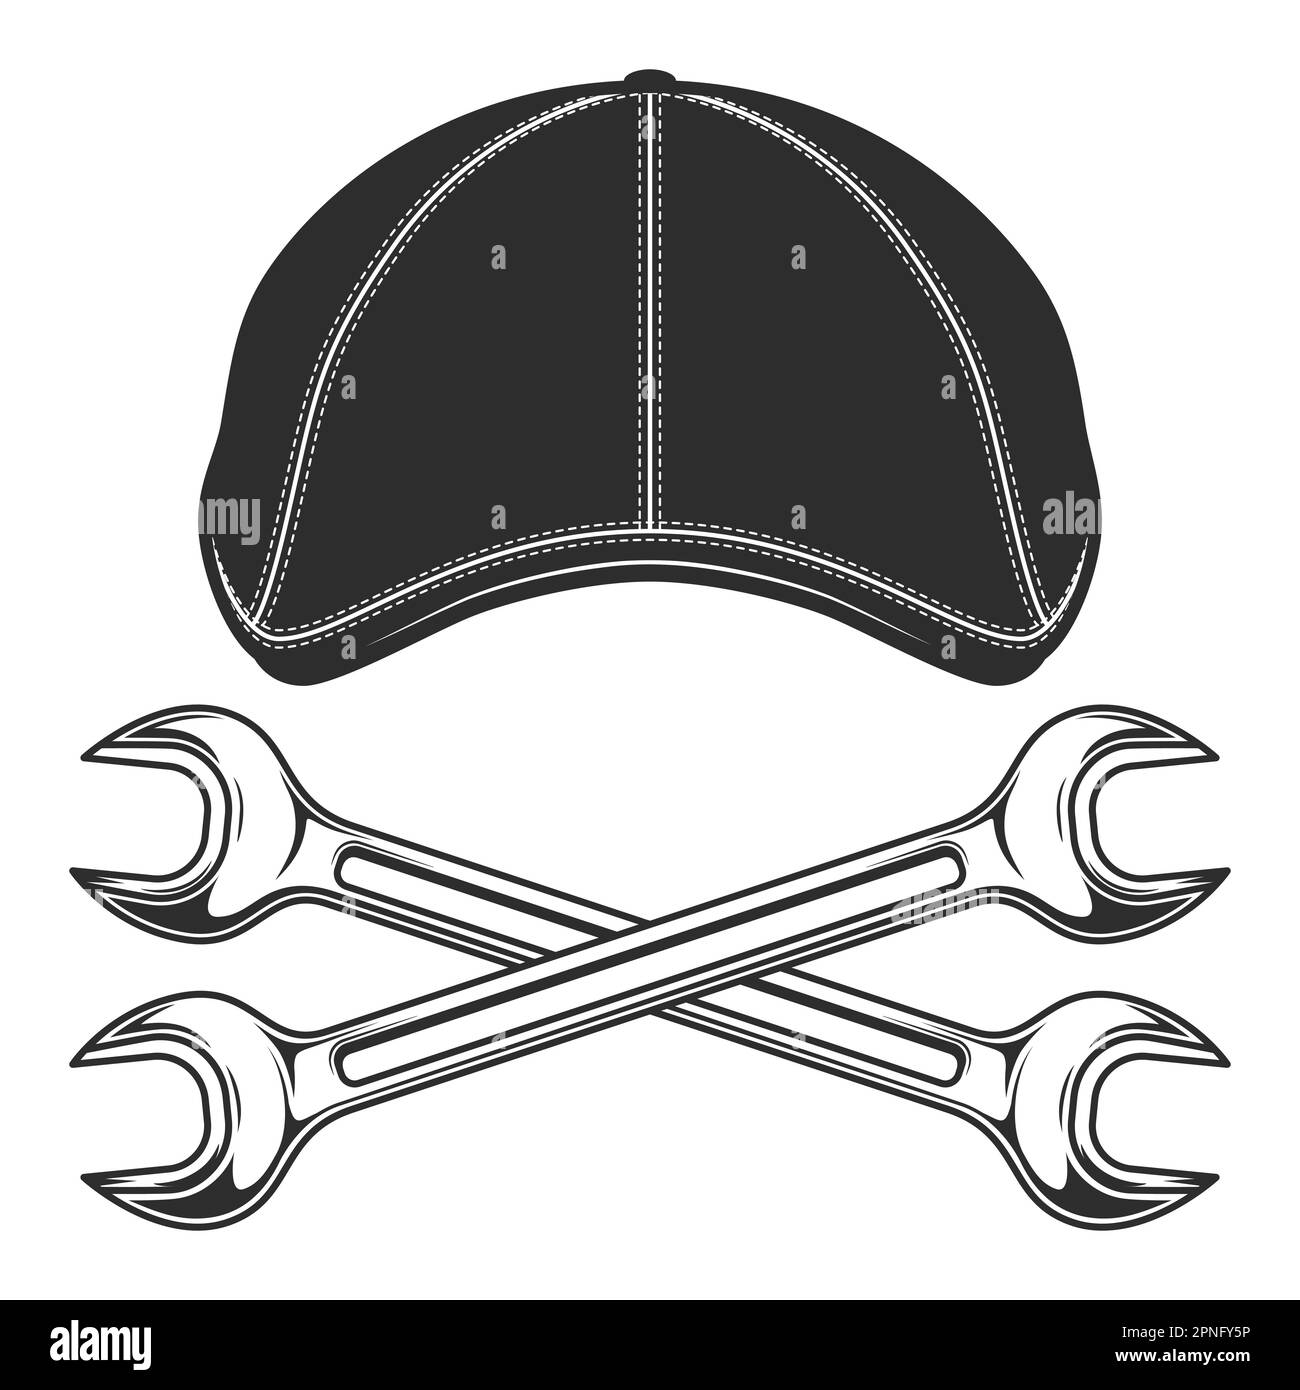 Flat cap gatsby tweed hat with constriction or mechanic service repair spanner wrenvh vector vintage illustration Stock Vector